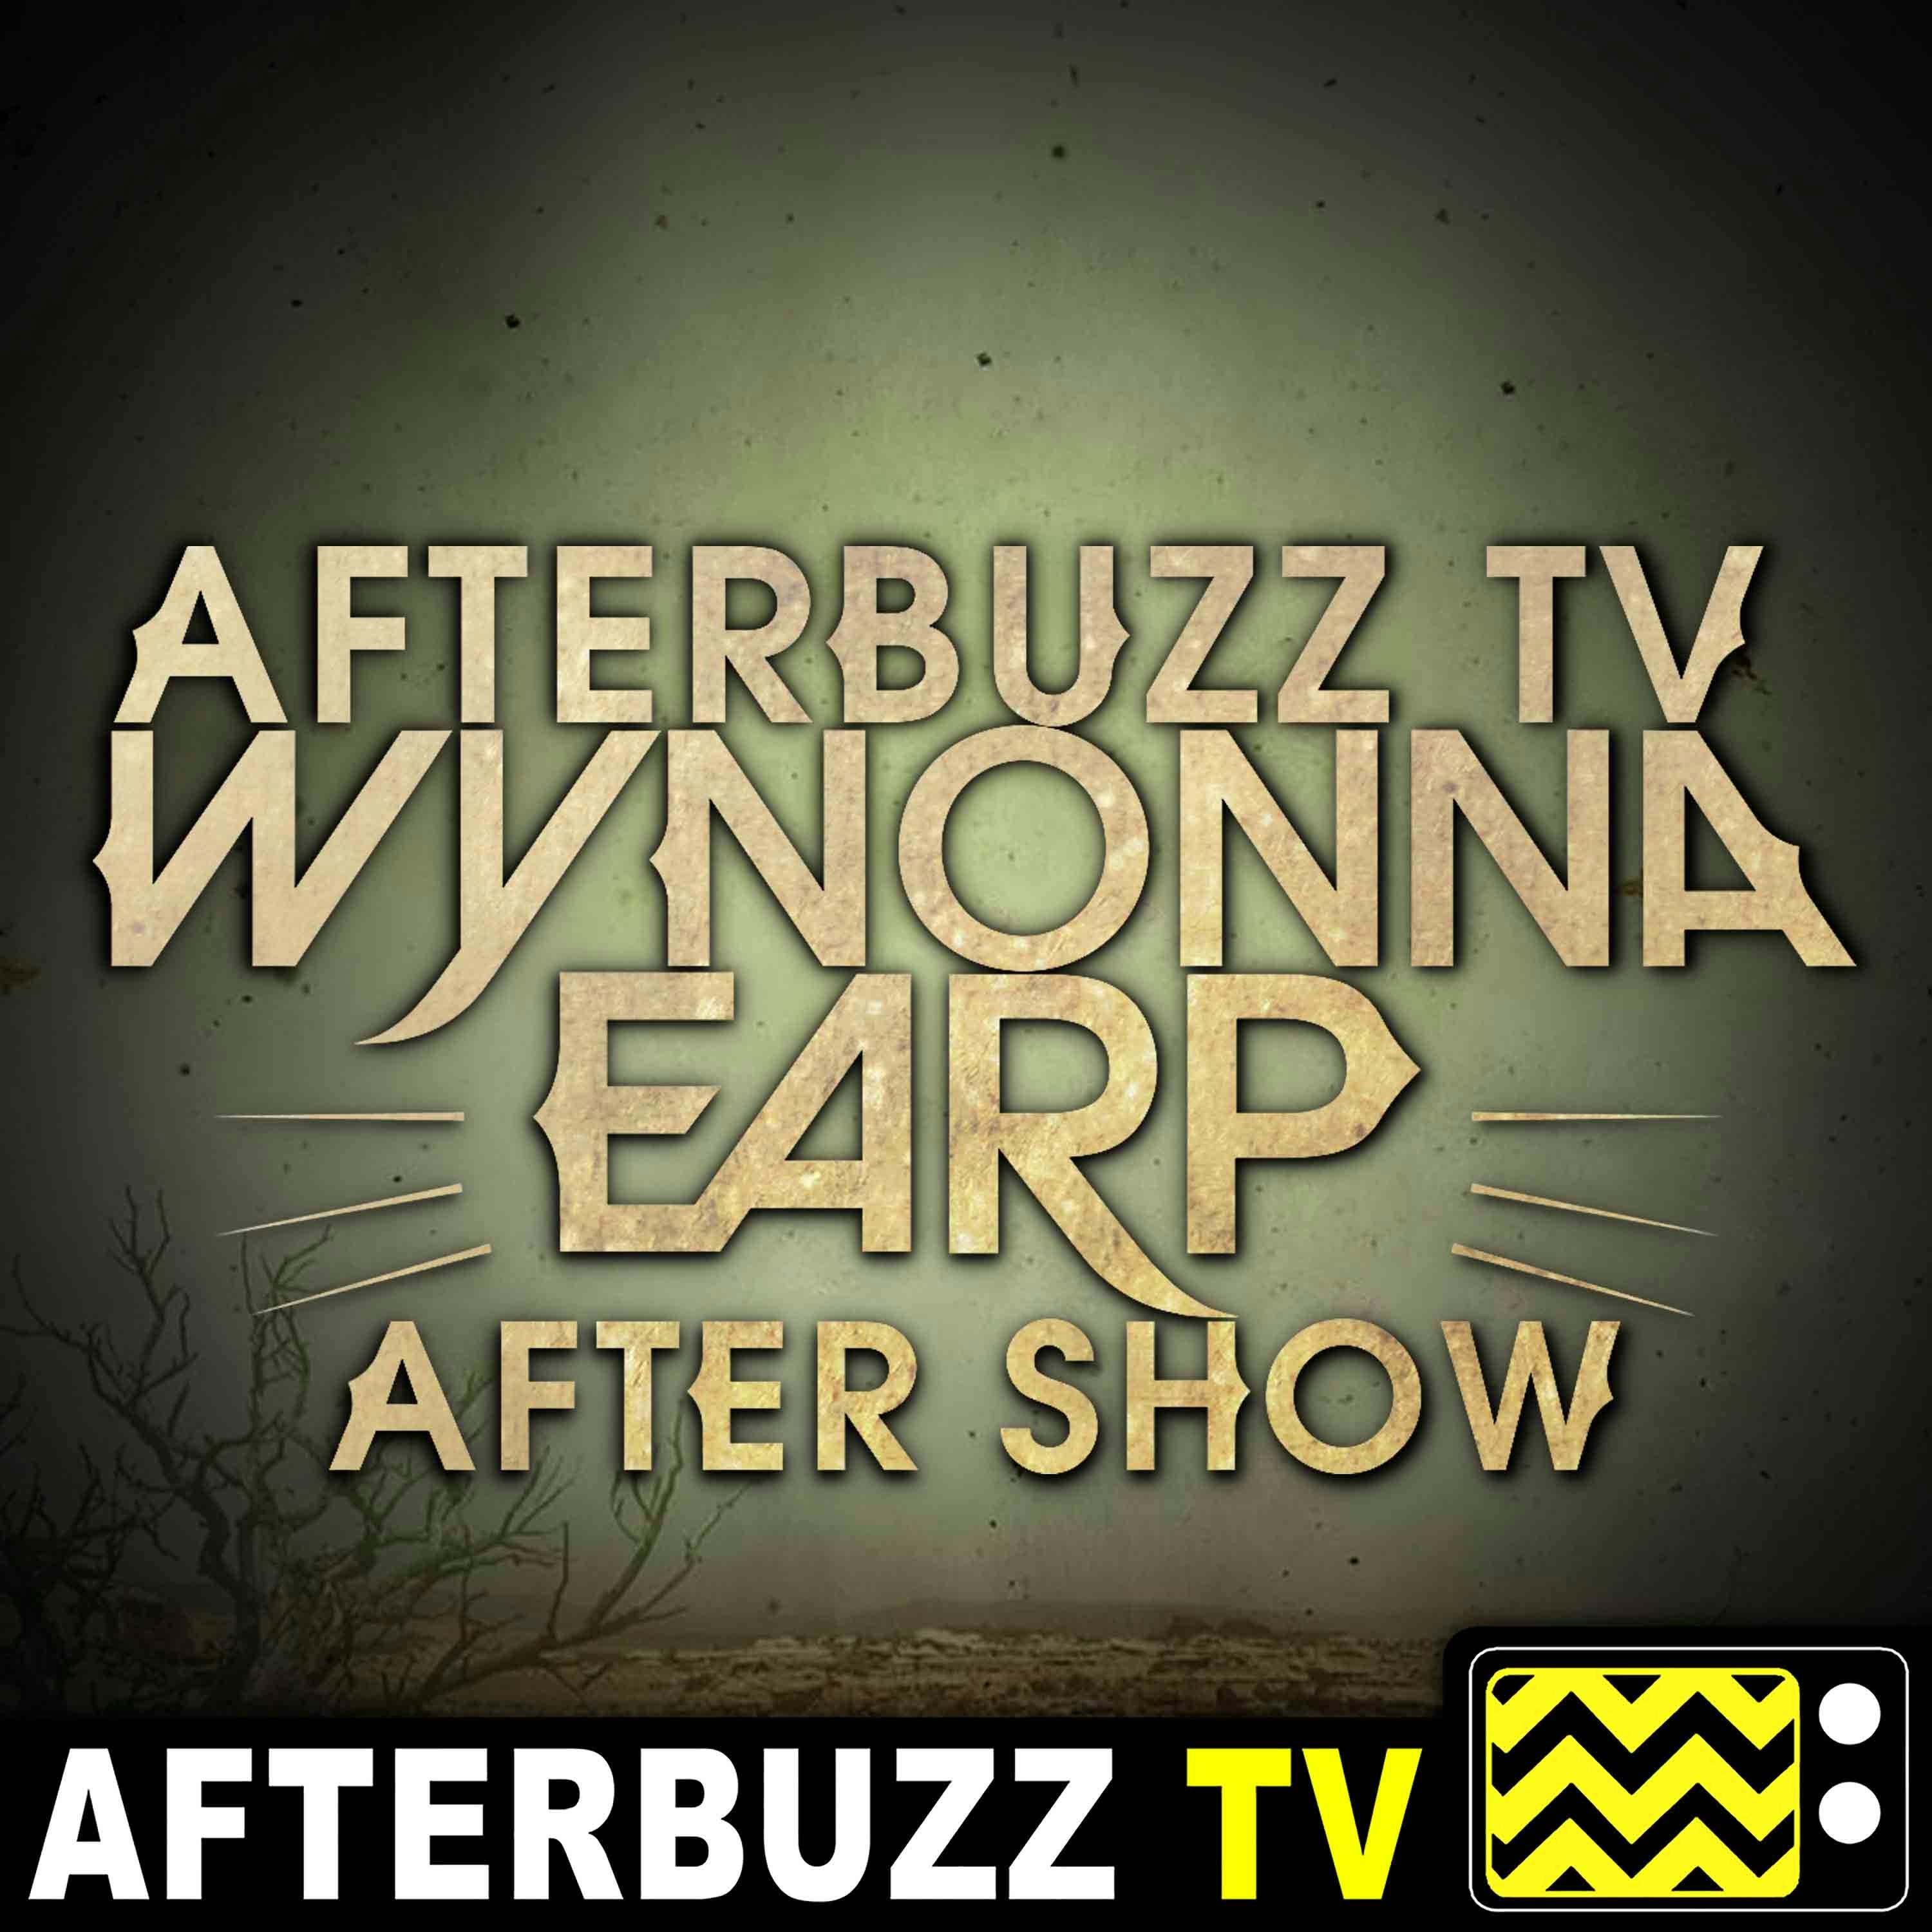 Wynonna Earp S:2 | Everybody Knows E:7 | AfterBuzz TV AfterShow